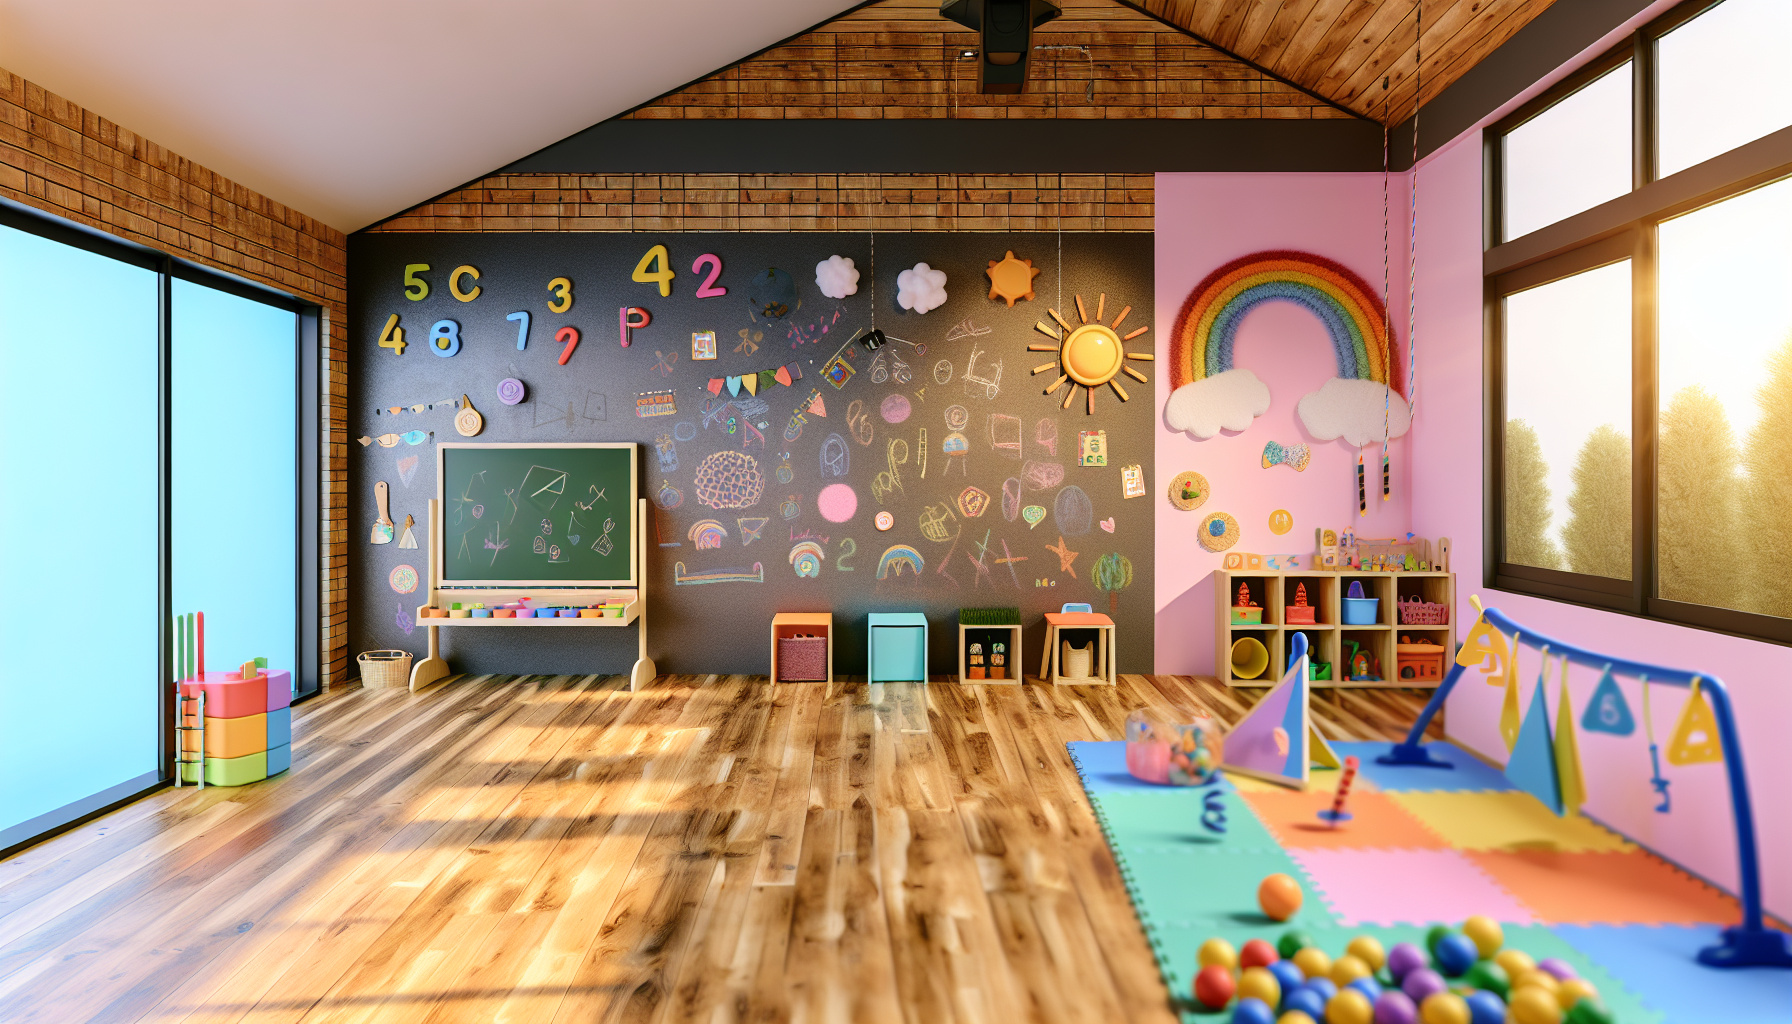 Interactive elements like chalkboards and sensory play stations